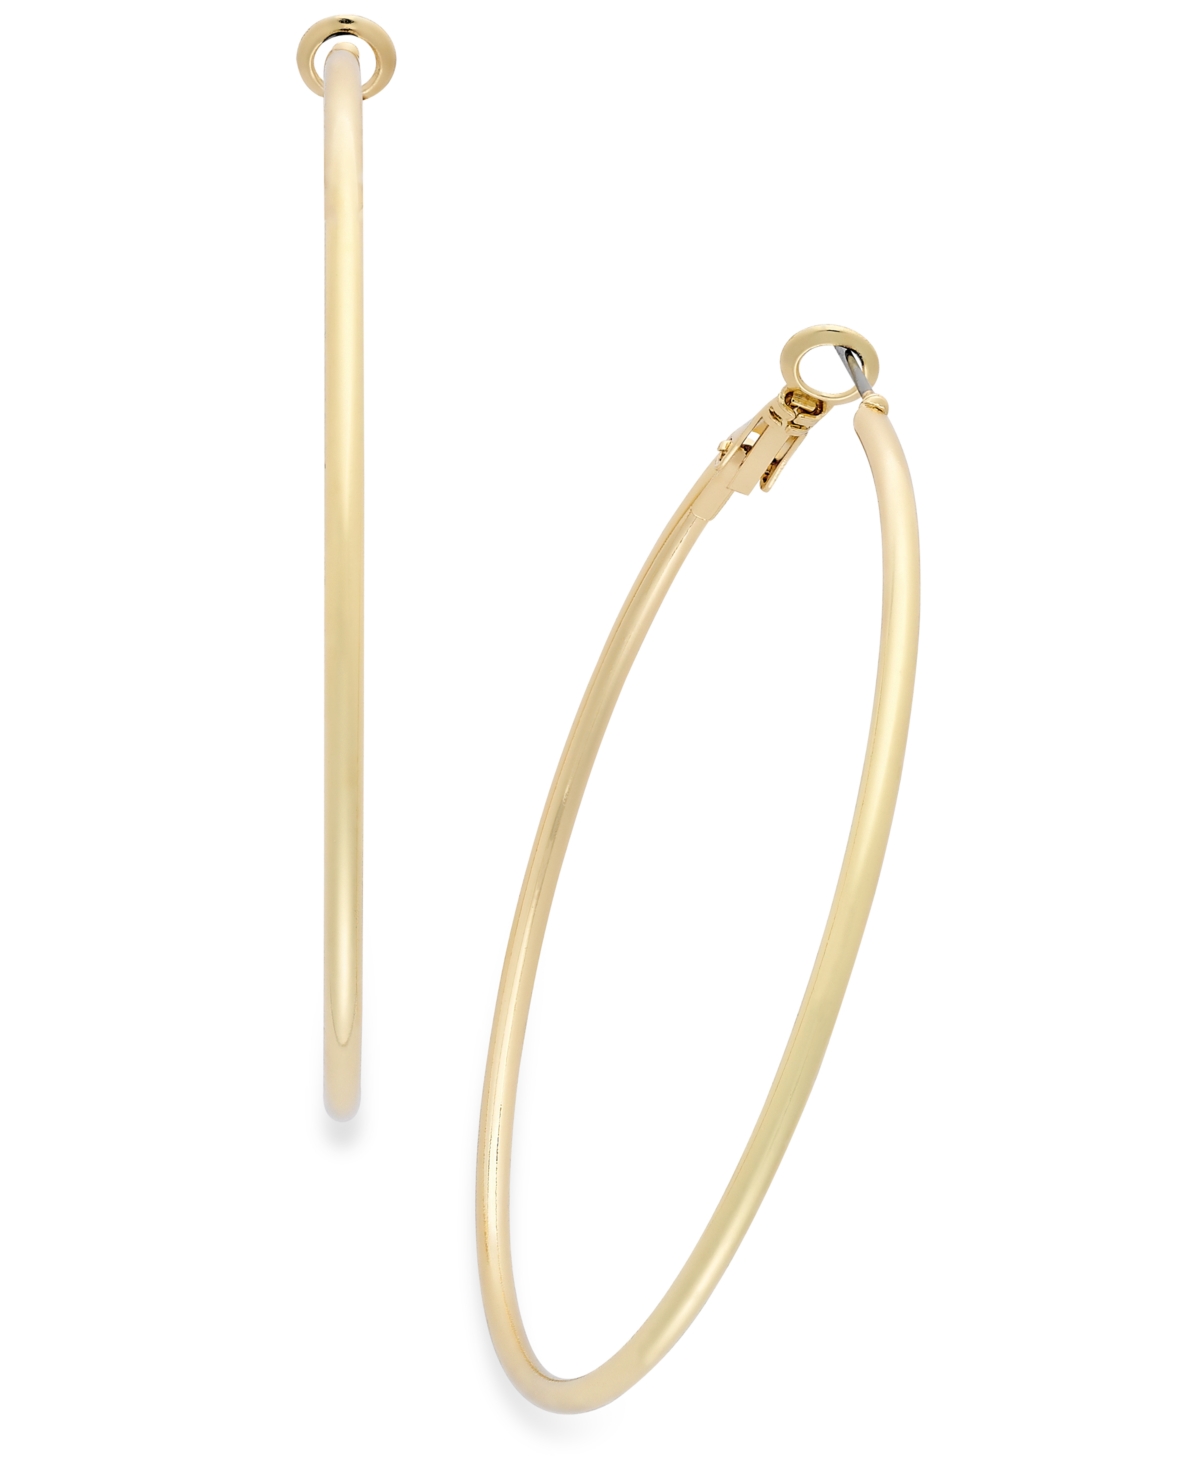 Gold-Tone Large Thin Hoop Earrings, 2.4", Created for Macy's - Gold